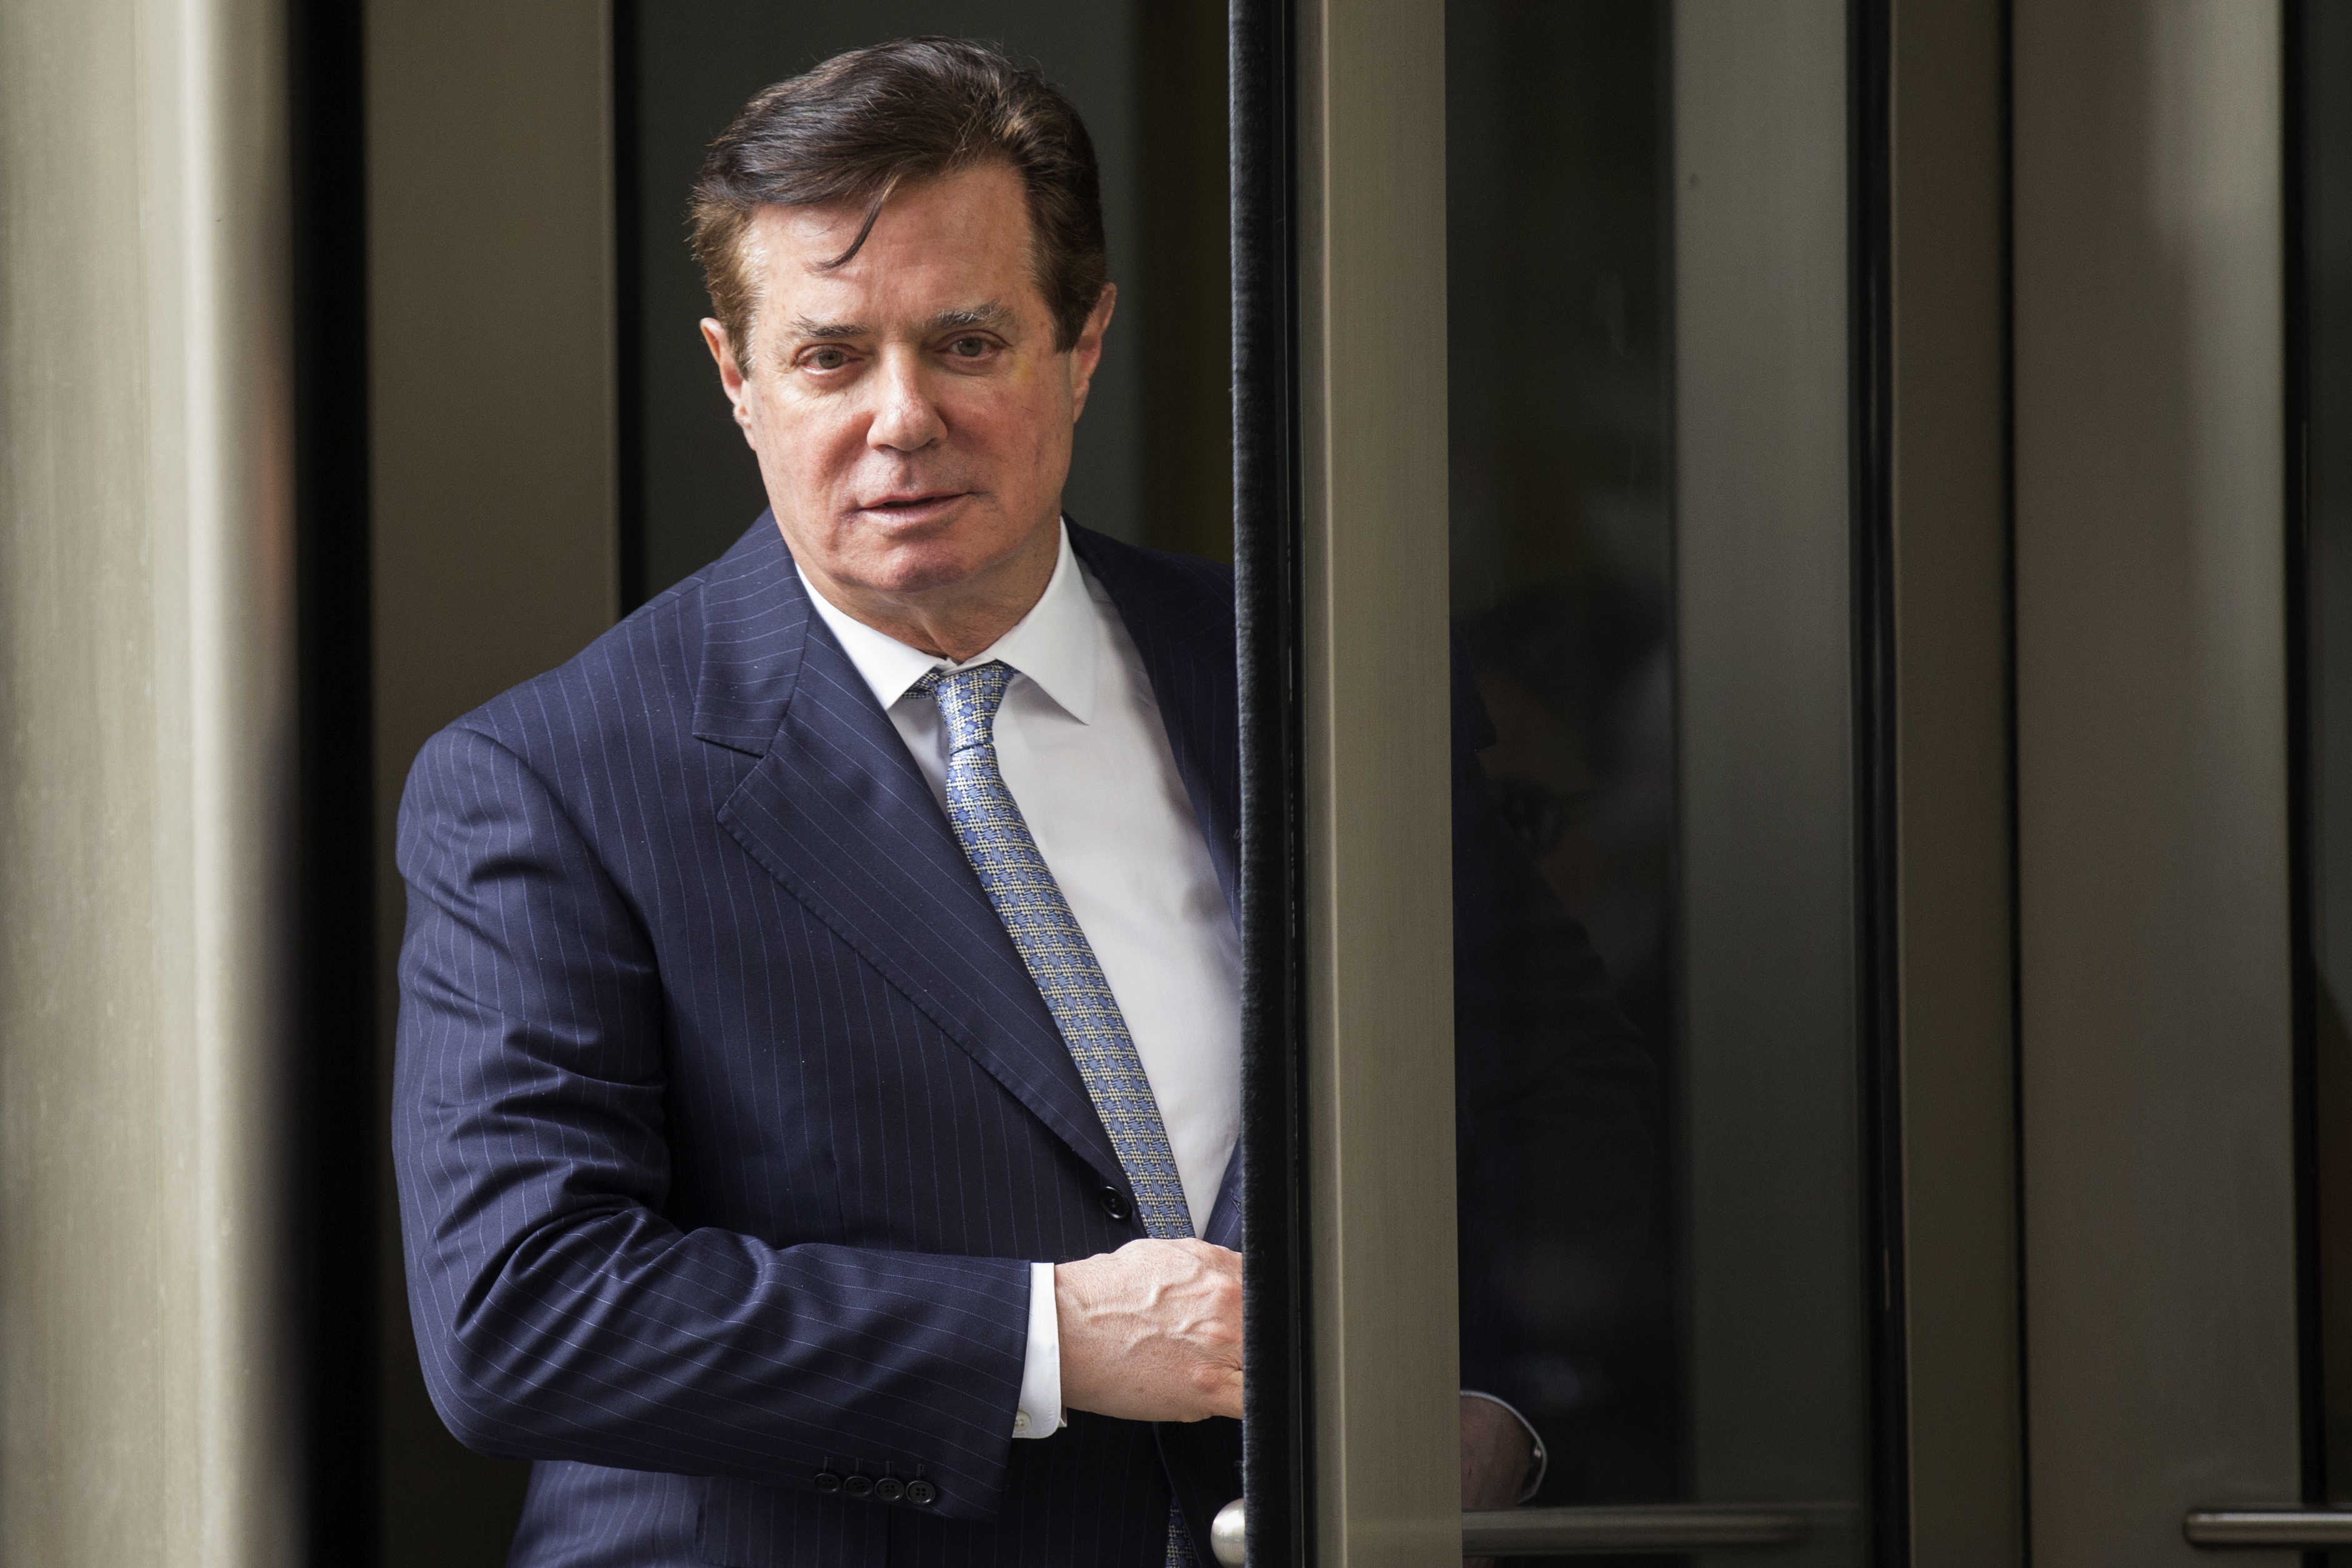 epa07368058 (FILE) - Former Trump campaign chairman Paul Manafort departs the federal court house after a status hearing in Washington, DC, USA, on 14 February 2018 (reissued 13 February 2019). A judge has voided Manafort's plea deal on 13 February 2019, following a closed hearing on whether Manafort broke his plea agreement with Special Counsel Robert Mueller.  EPA/SHAWN THEW